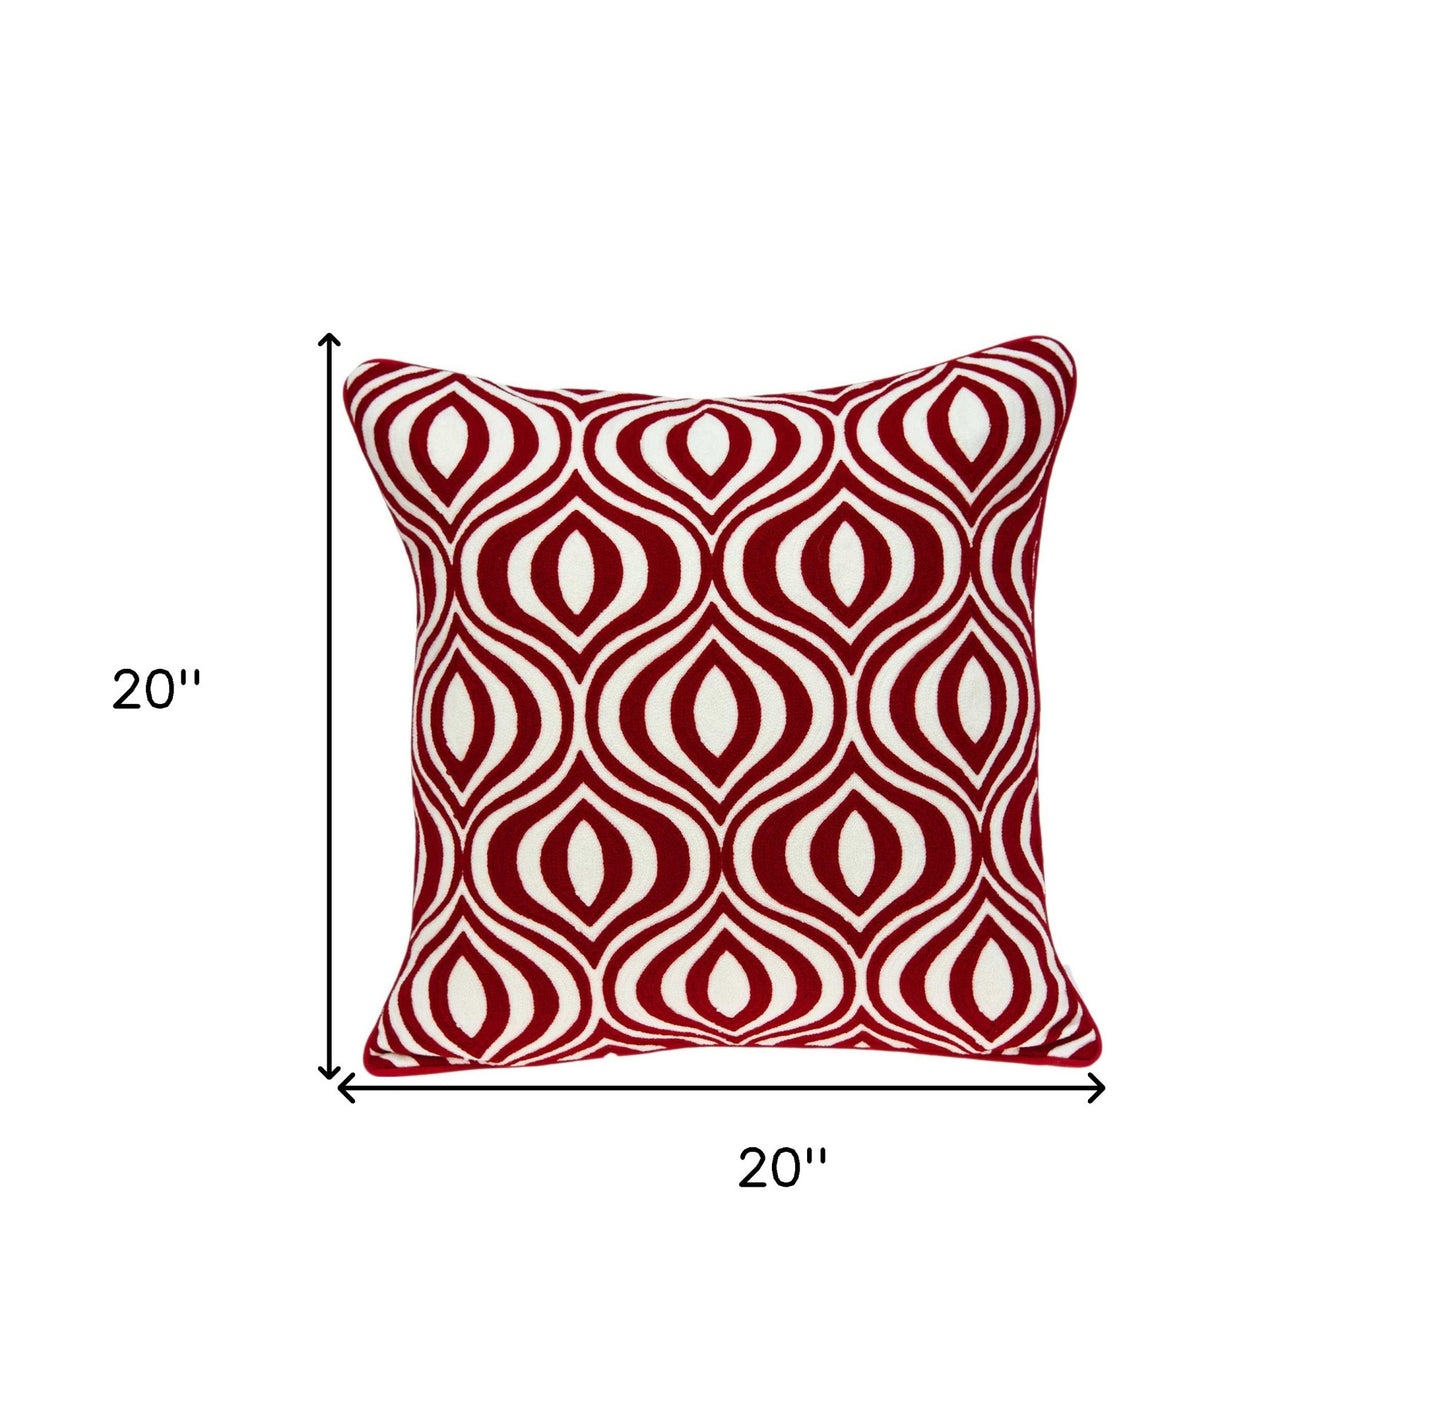 20" X 7" X 20" Transitional Red And White Pillow Cover With Poly Insert